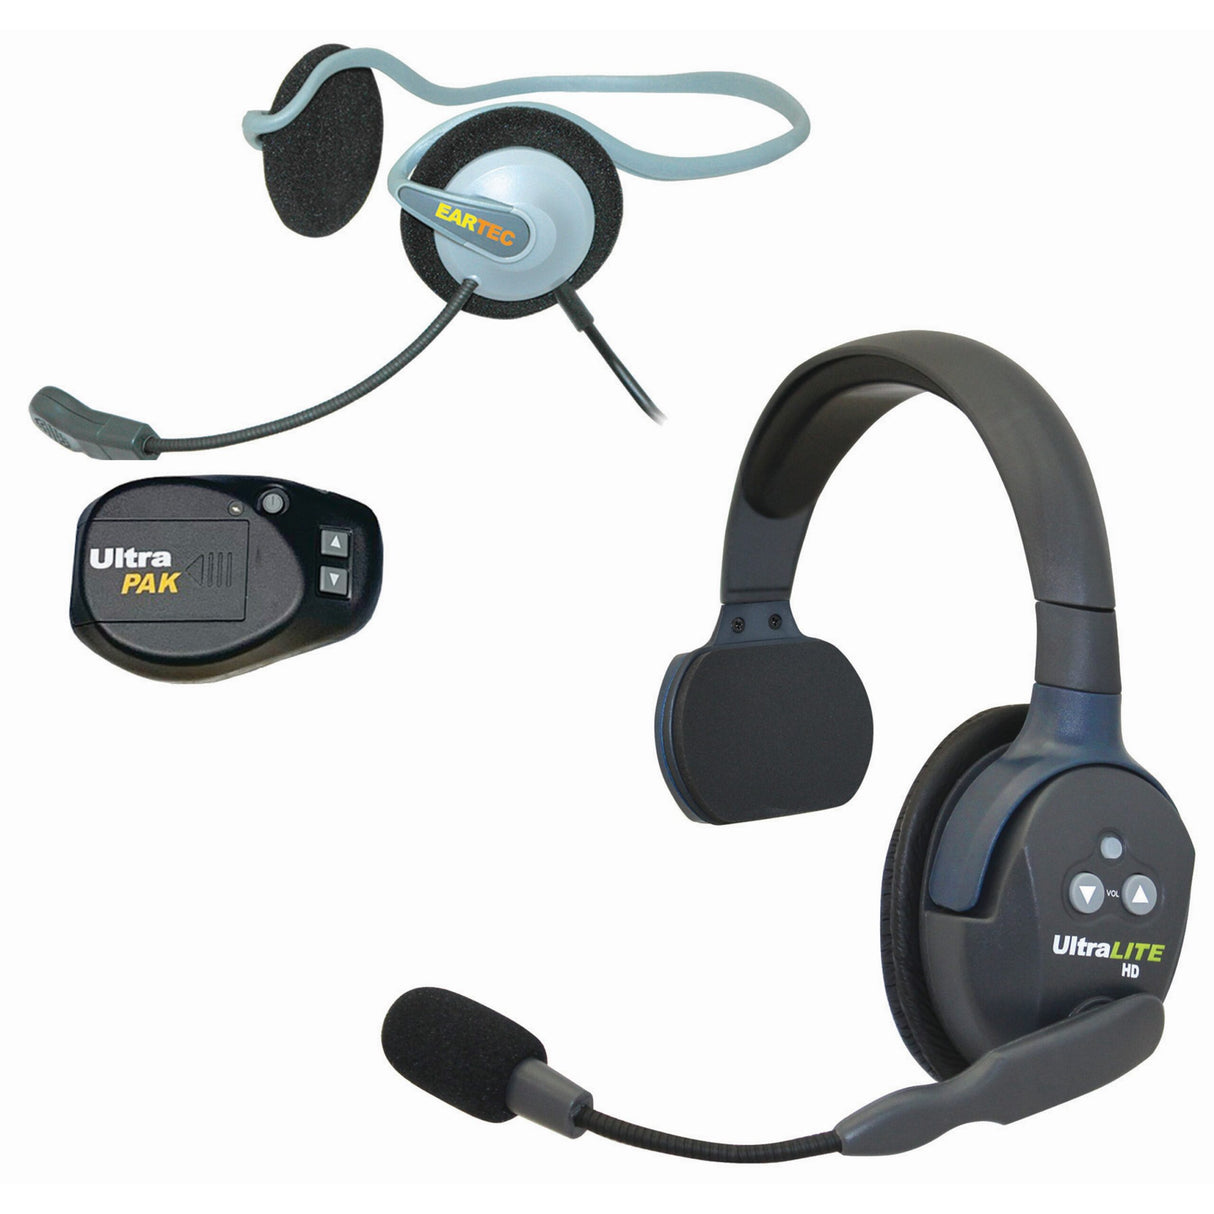 Eartec SMMON4 1 Single MAIN UltraLITE and 3 Monarch/UltraPAK Headsets